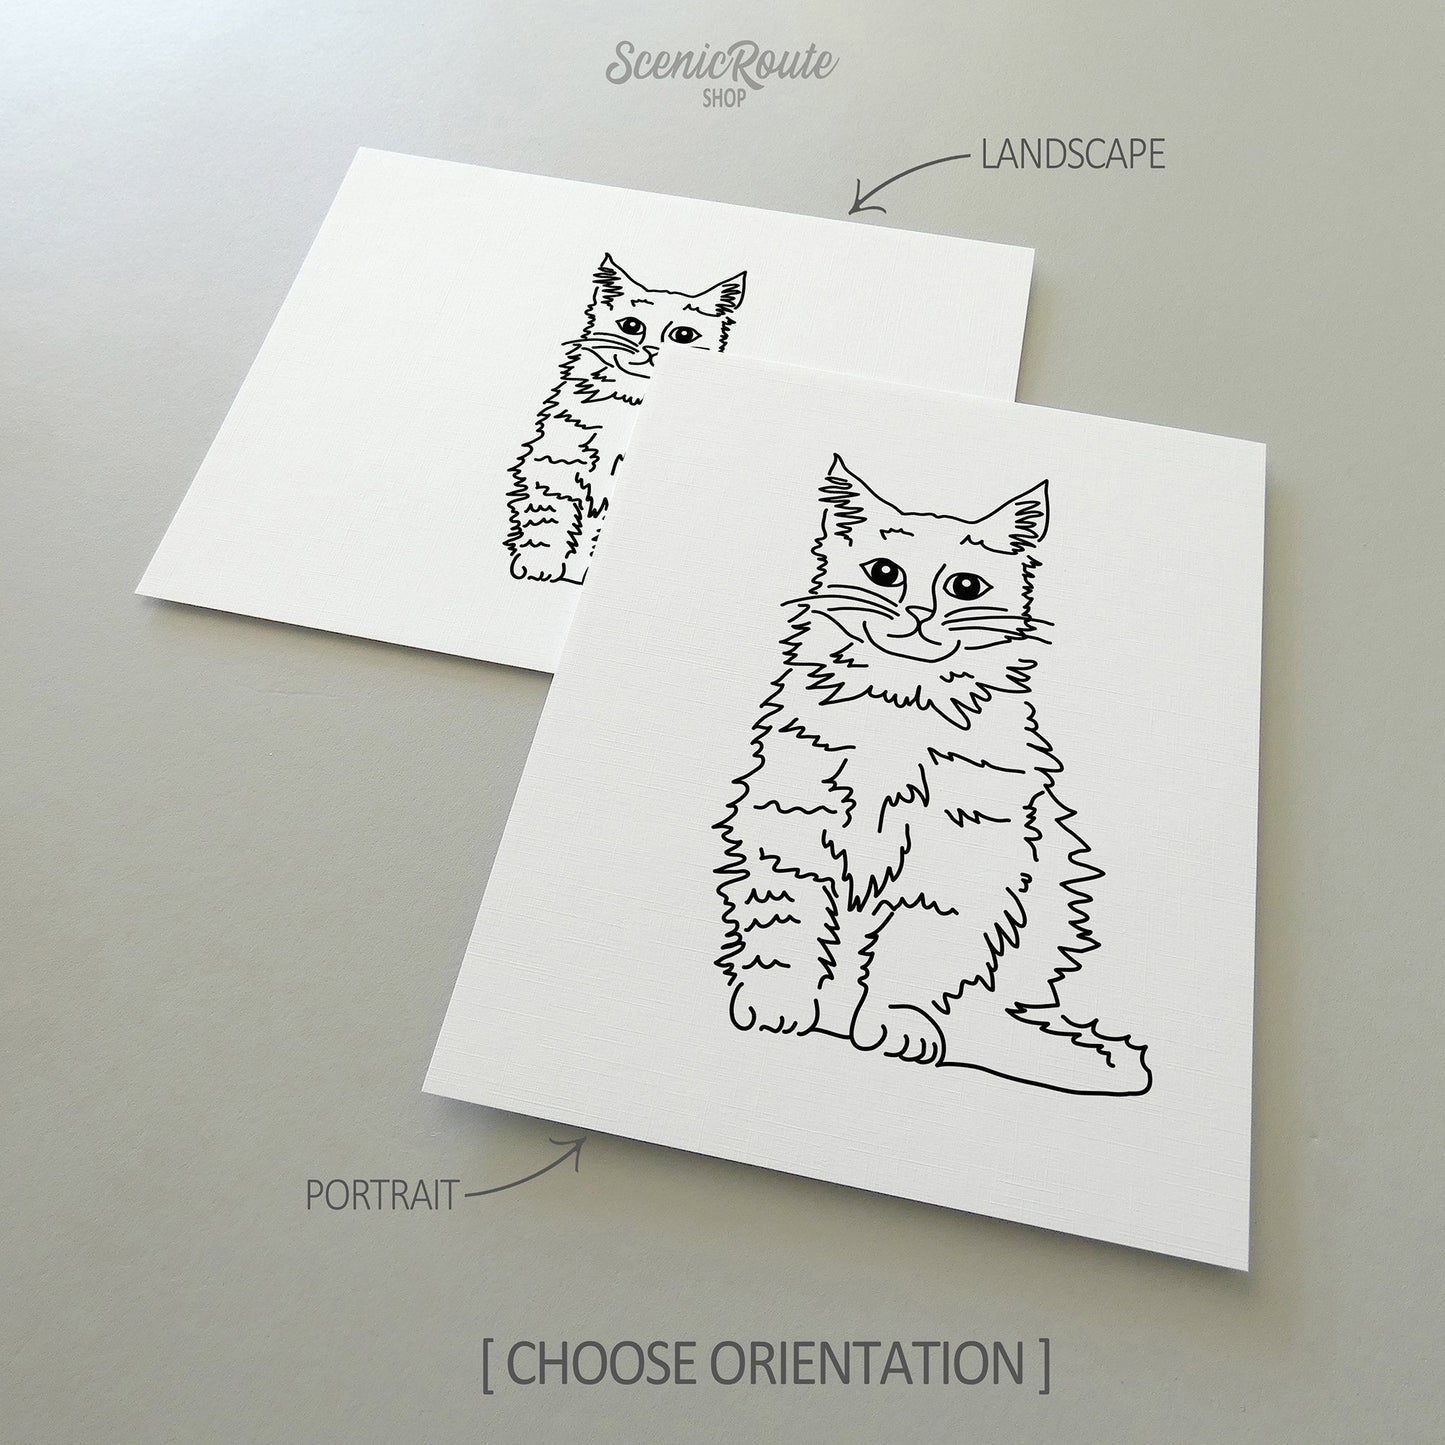 Two line art drawings of a Maine Coon cat on white linen paper with a gray background.  The pieces are shown in portrait and landscape orientation for the available art print options.